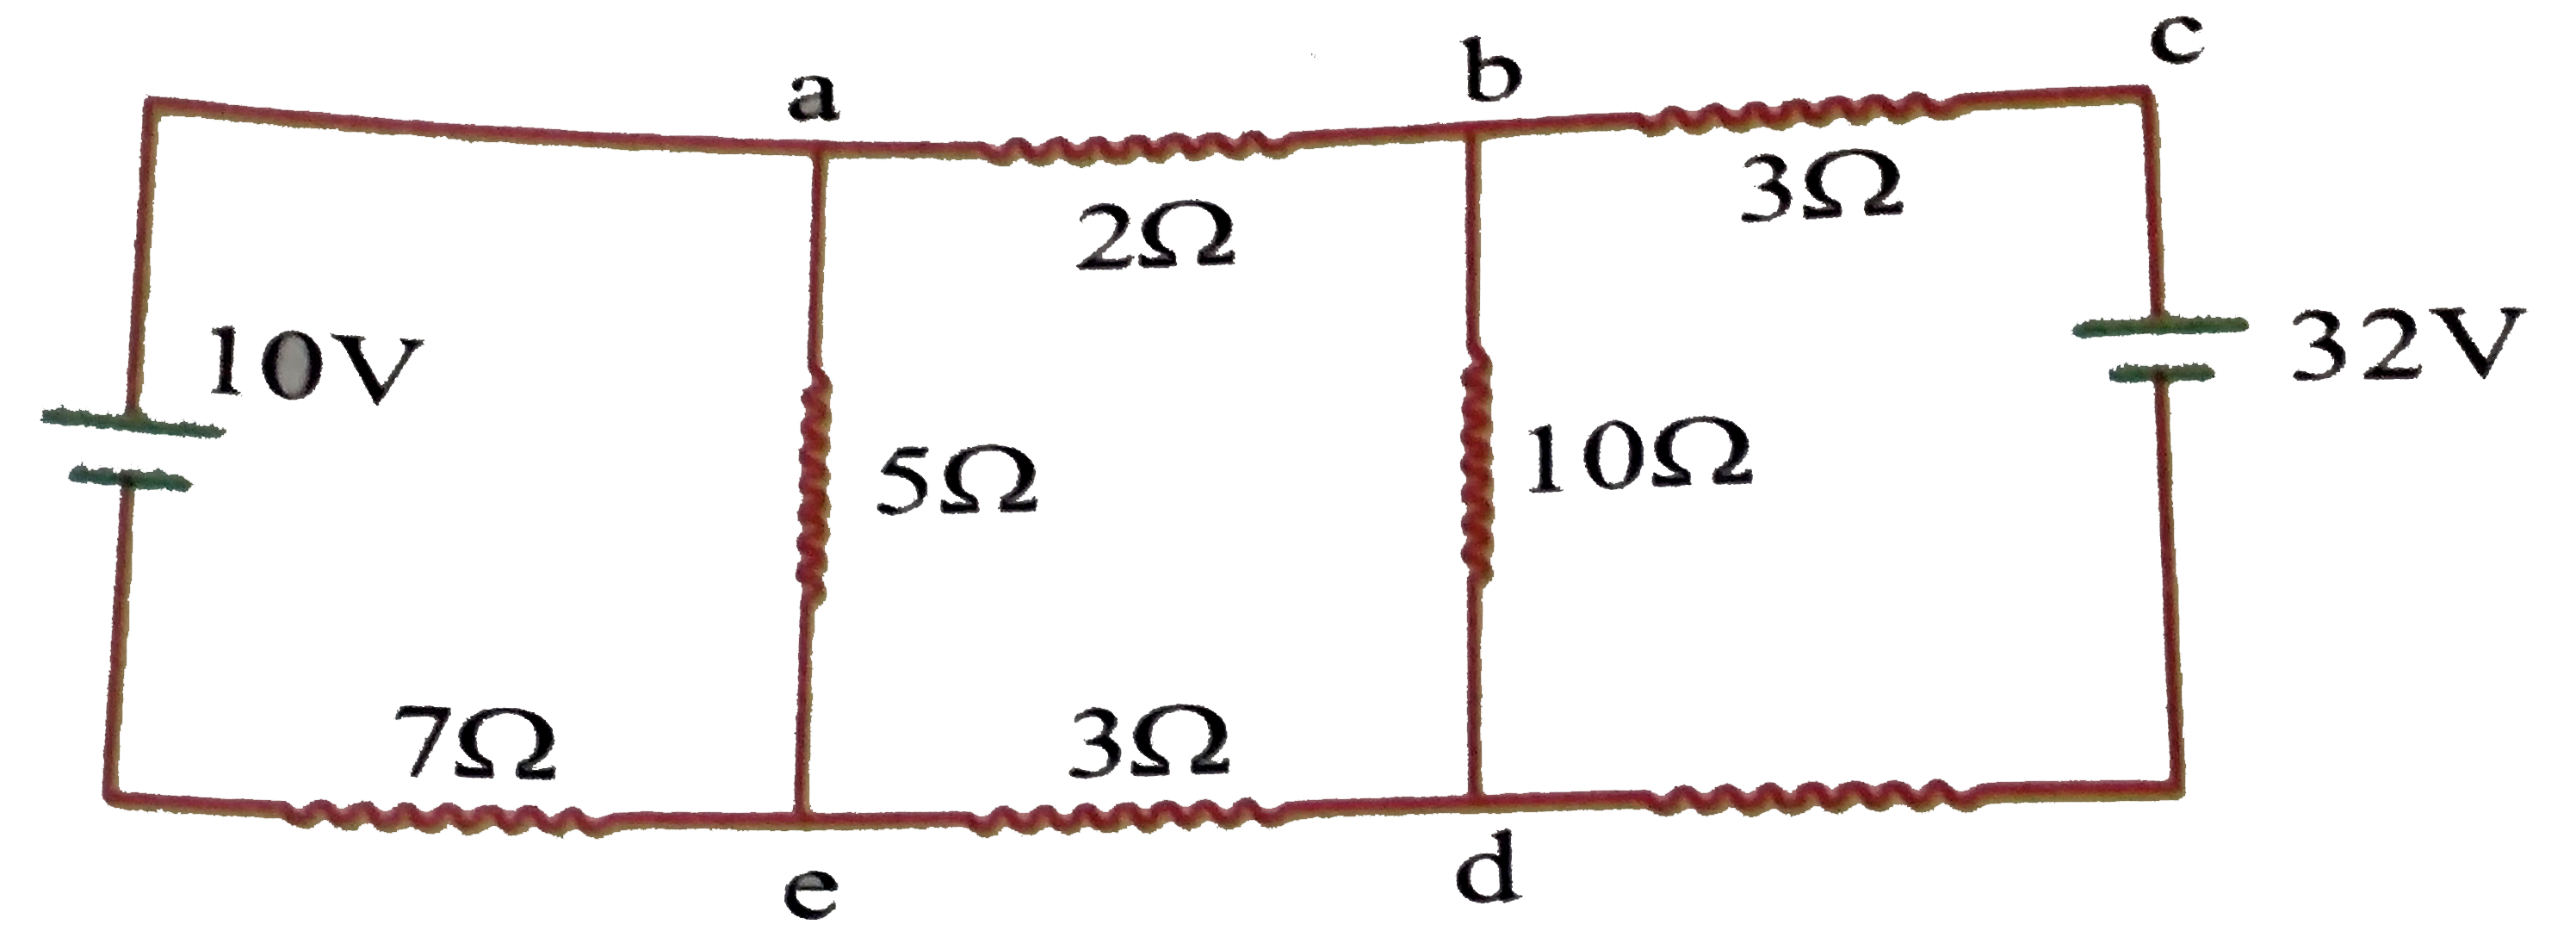 In the circuit diagram shown in the figure,